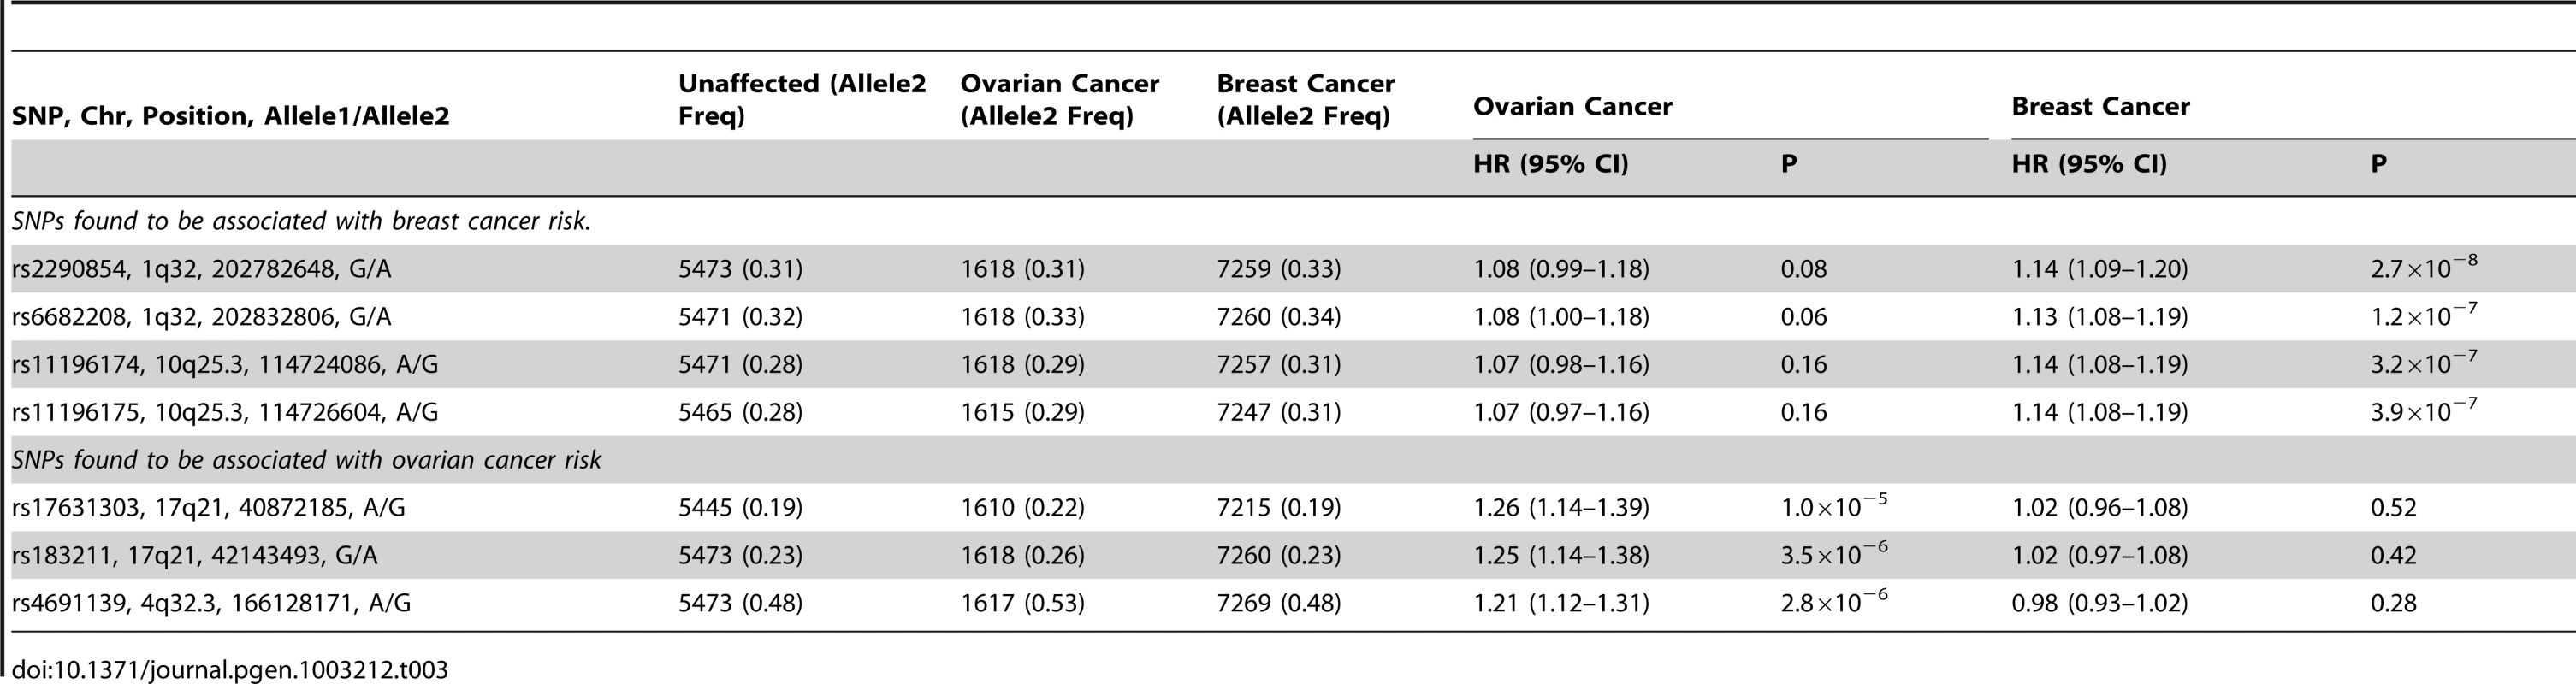 Analysis of associations with breast and ovarian cancer risk simultaneously (competing risks analysis) for SNPs found to be associated with breast or ovarian cancer.